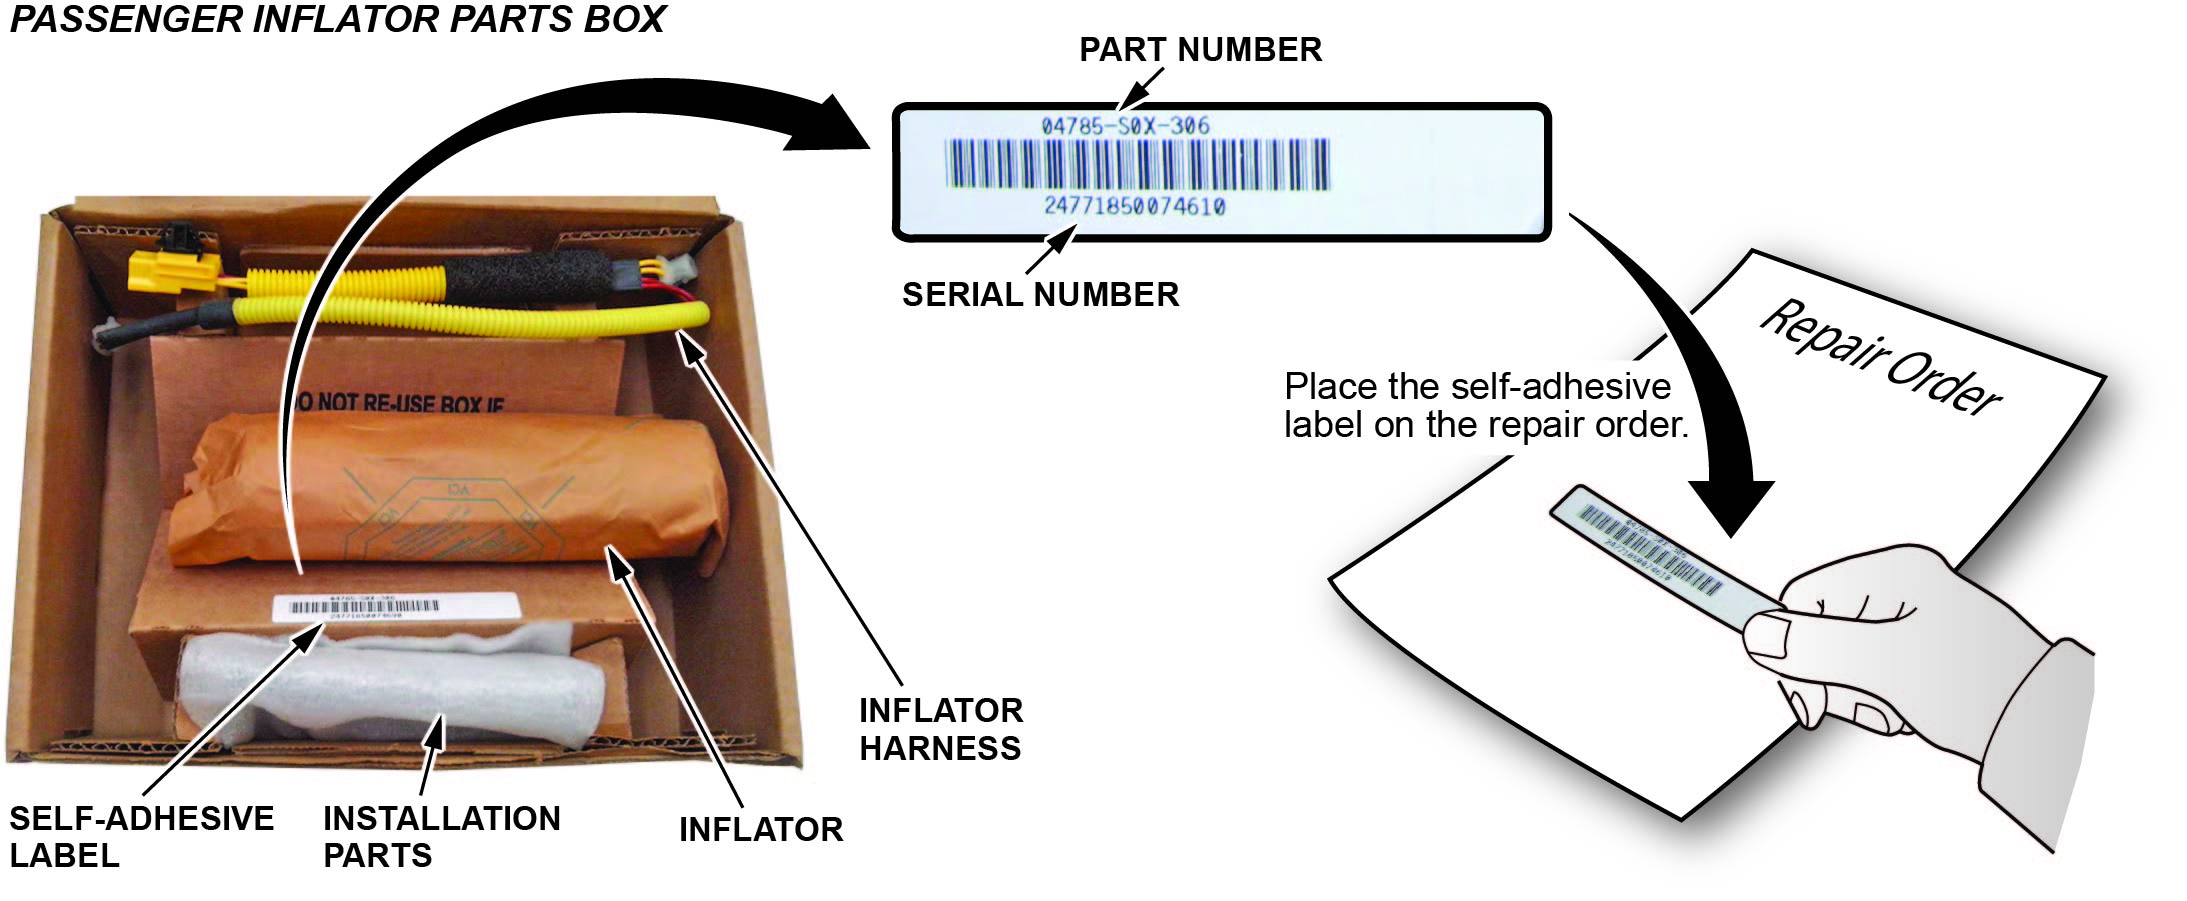 label located inside the inflator box